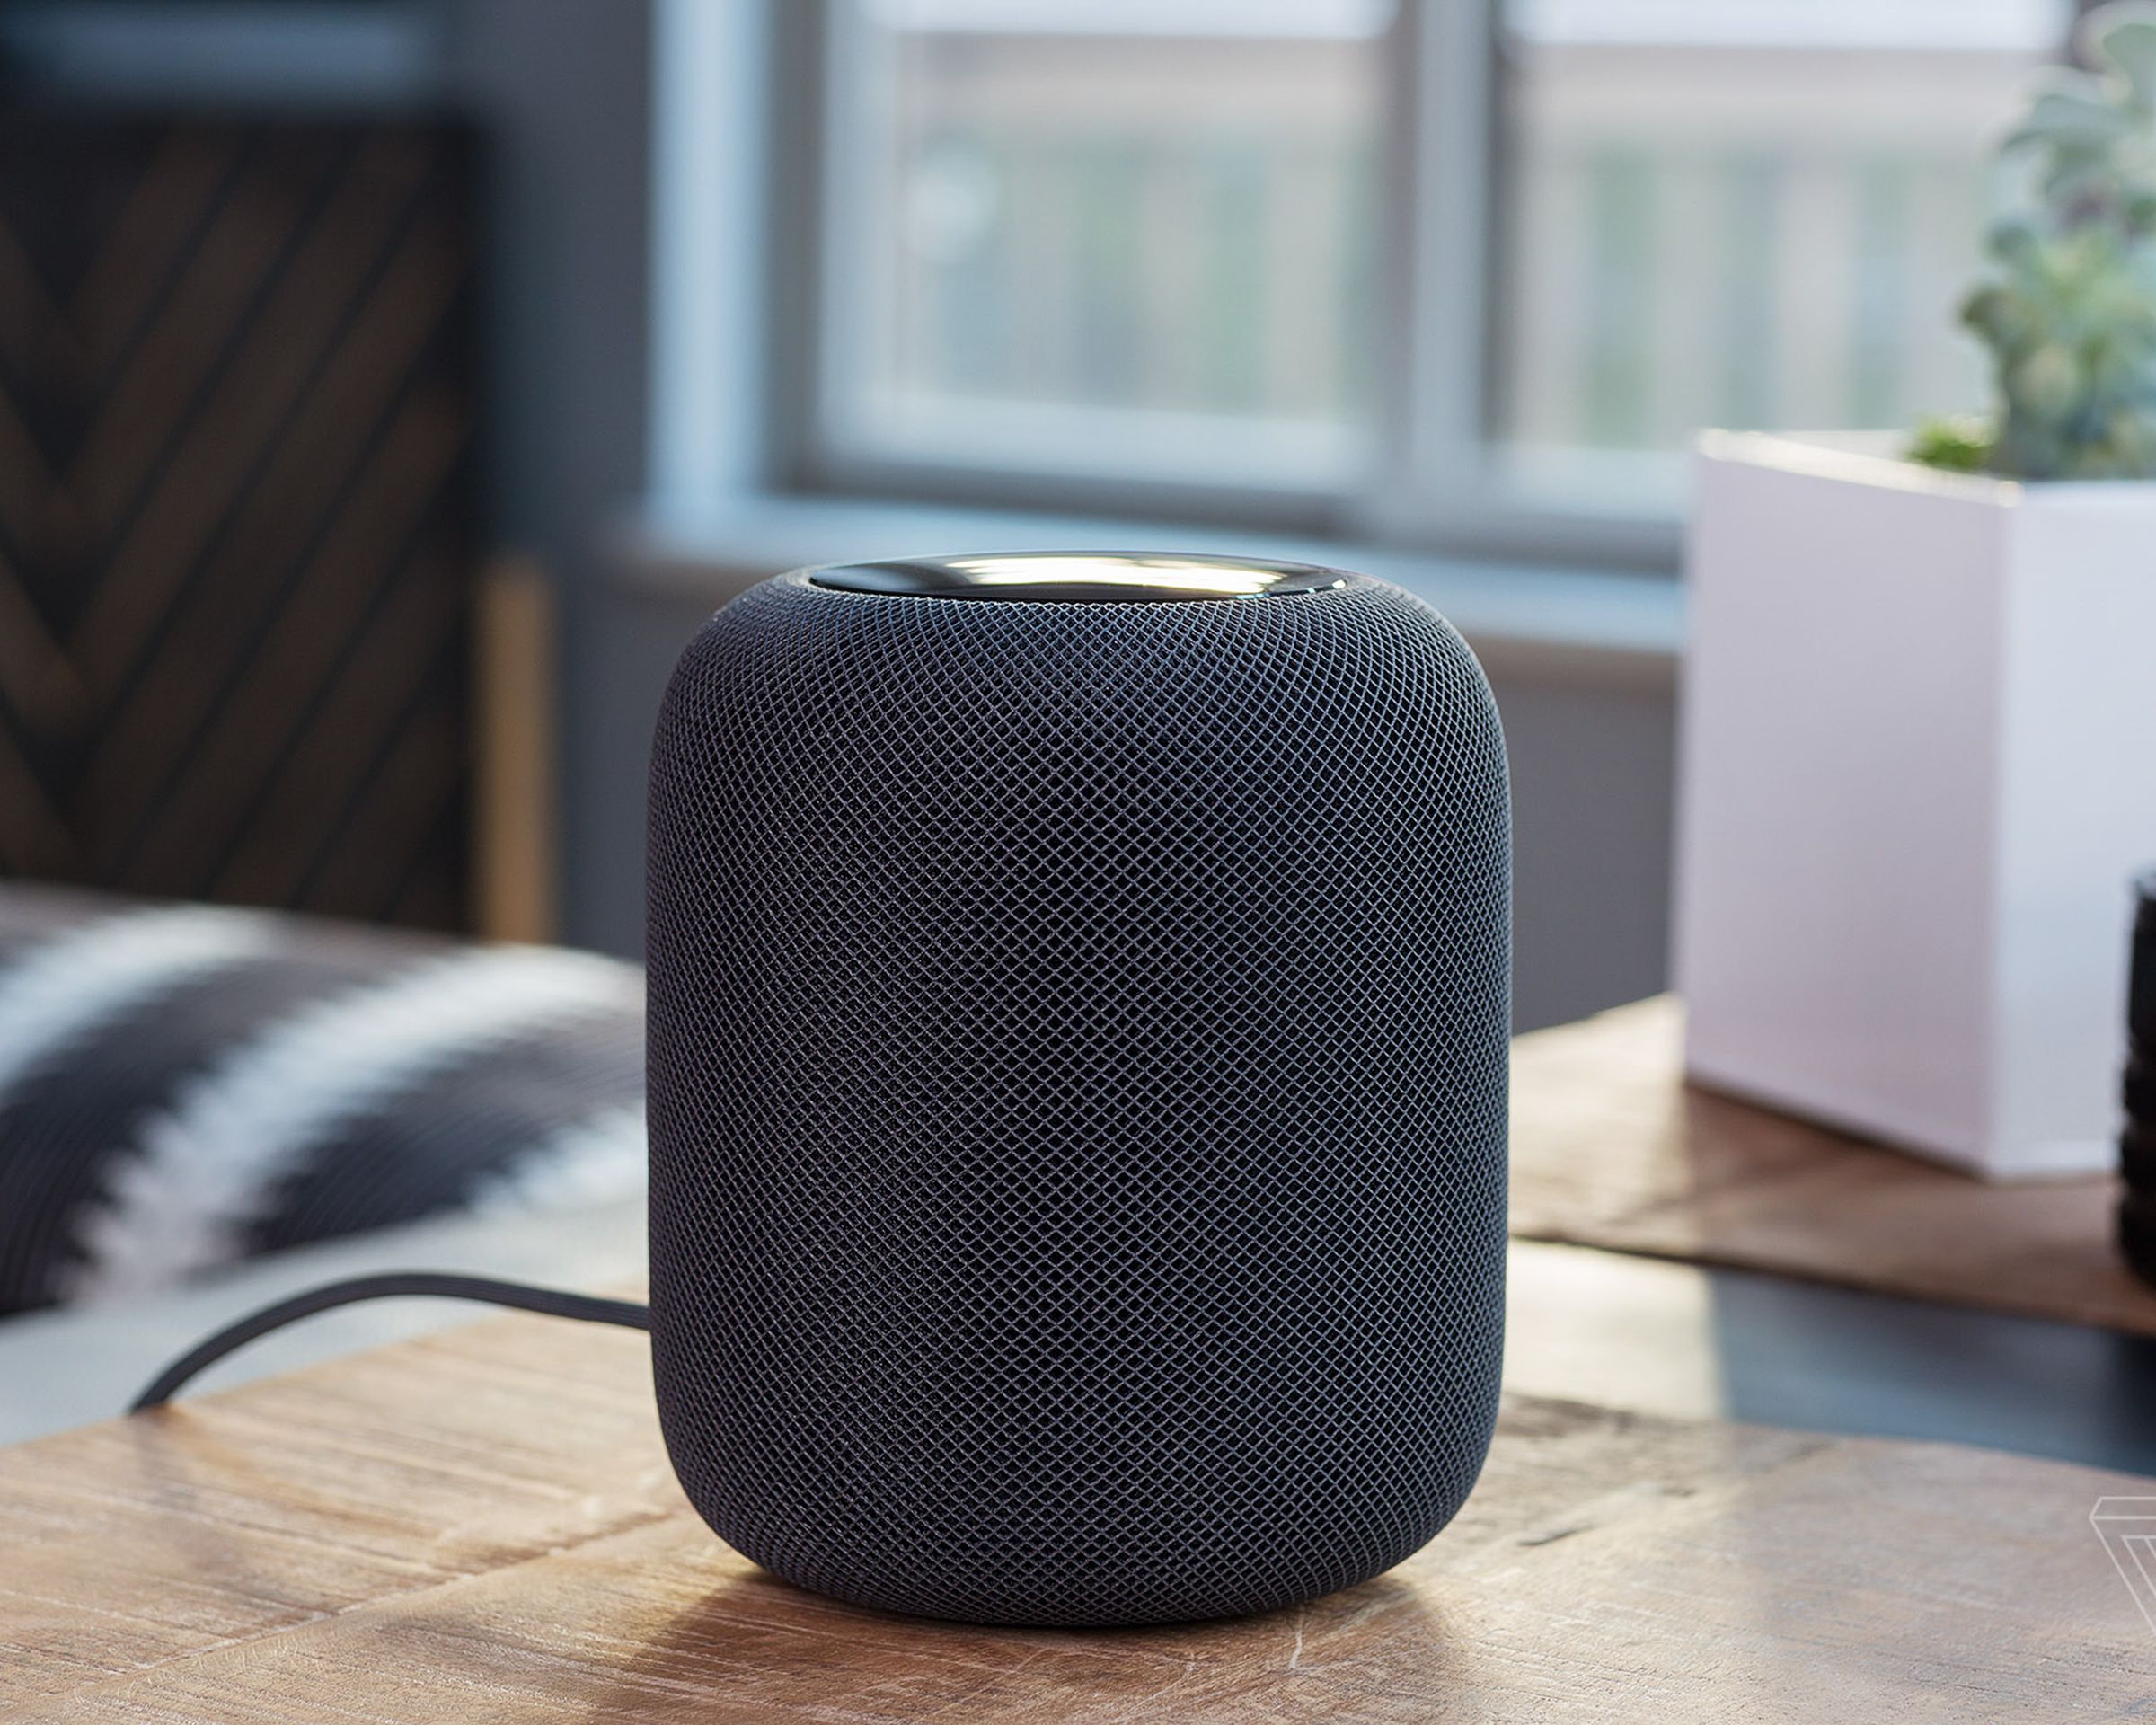 A first-generation HomePod on a desk in a room.